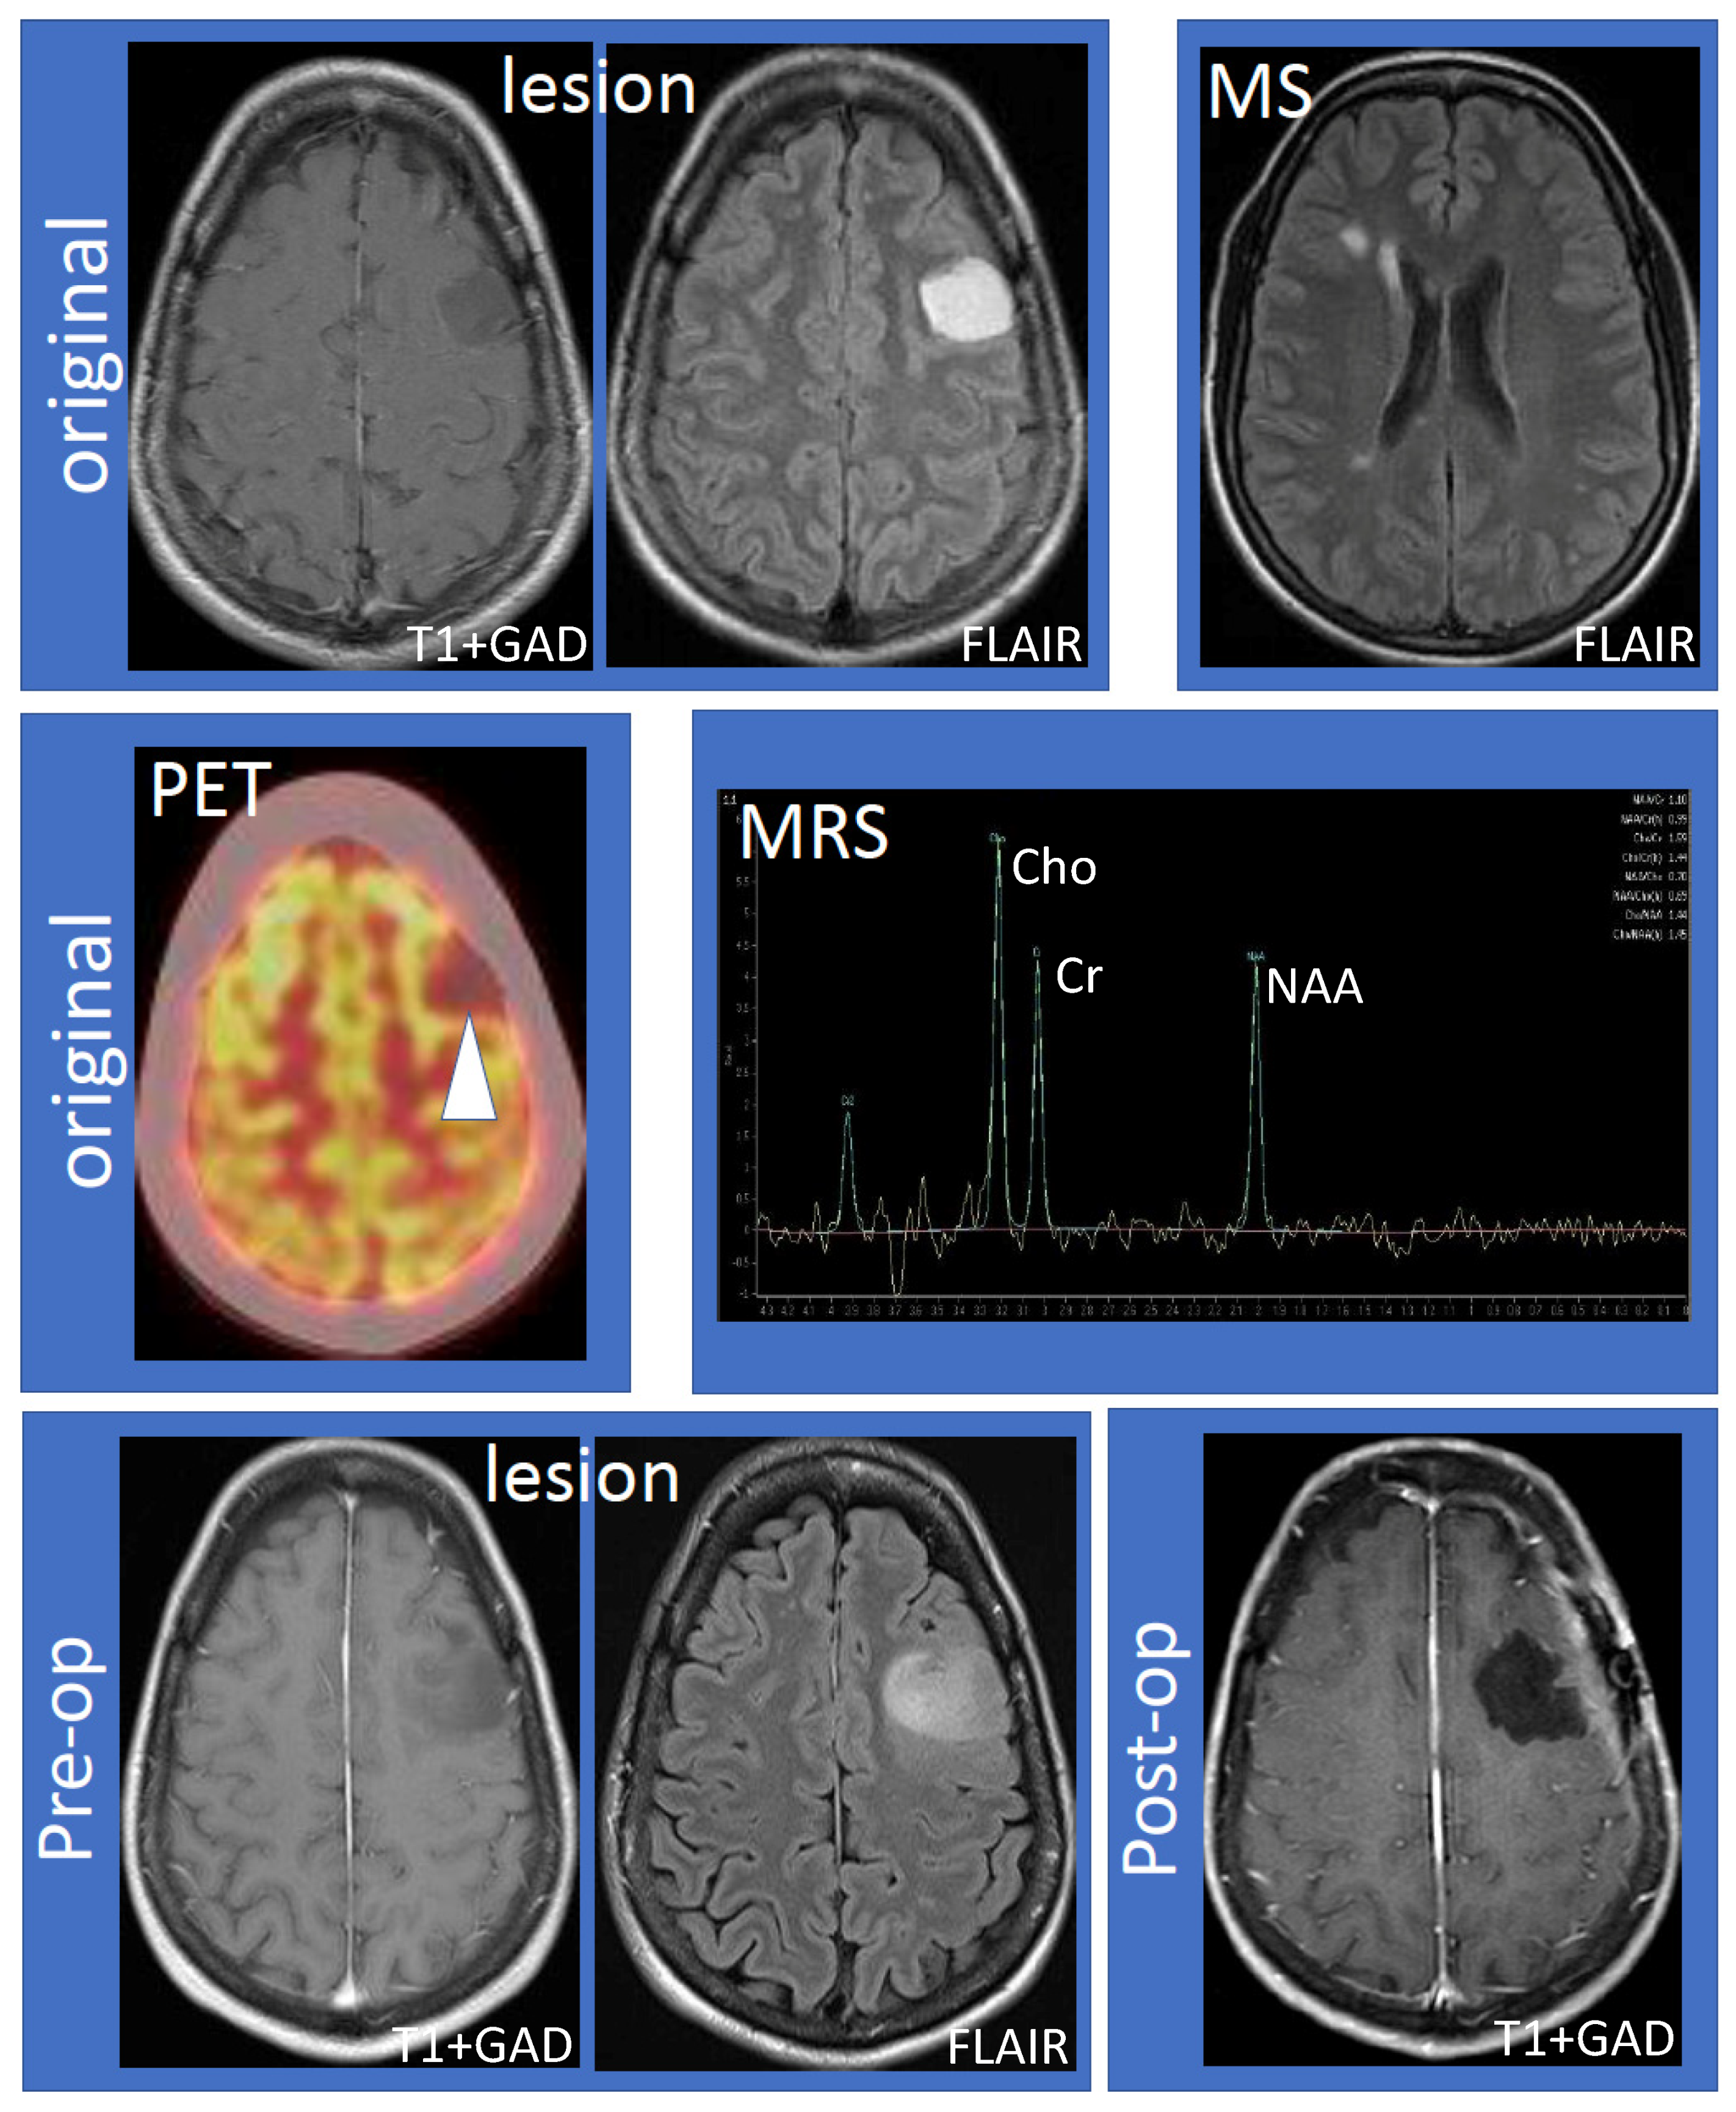 Frontiers | Multifocal brain abscesses caused by invasive Streptococcus  intermedia: A case report